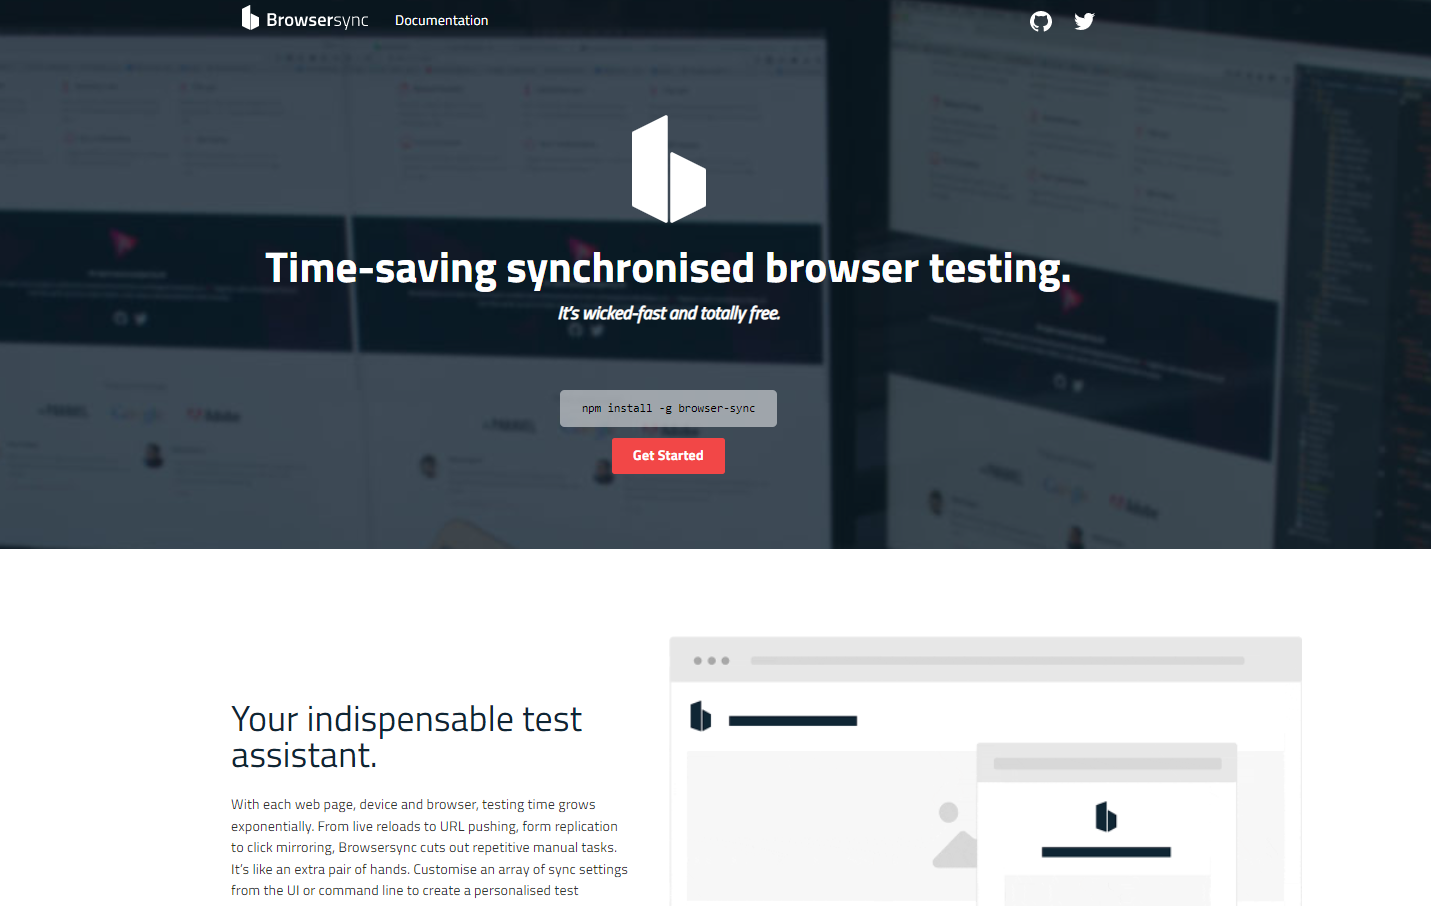 Browsersync allows the developer to test a website on several devices at once